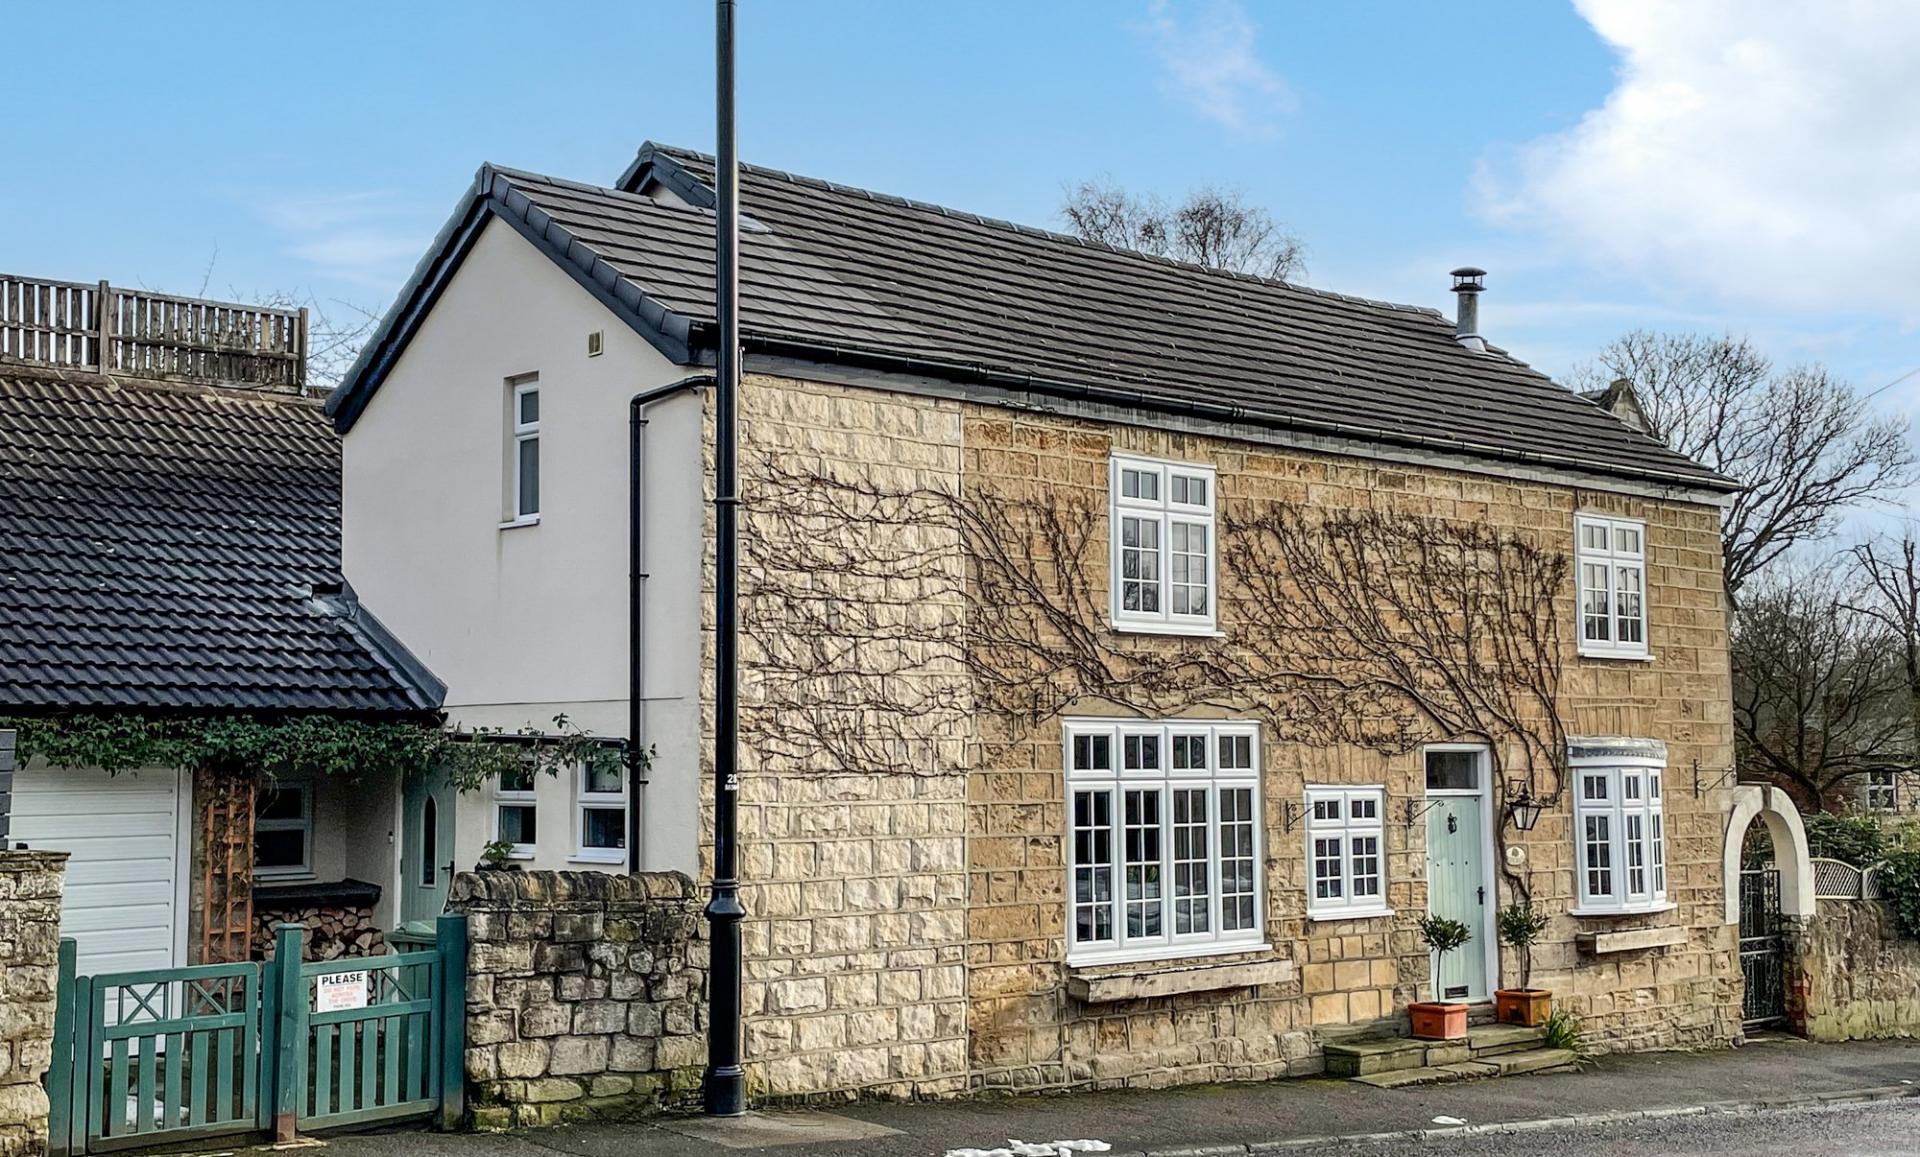 West Yorkshire stone built charming village cottage with blue door.